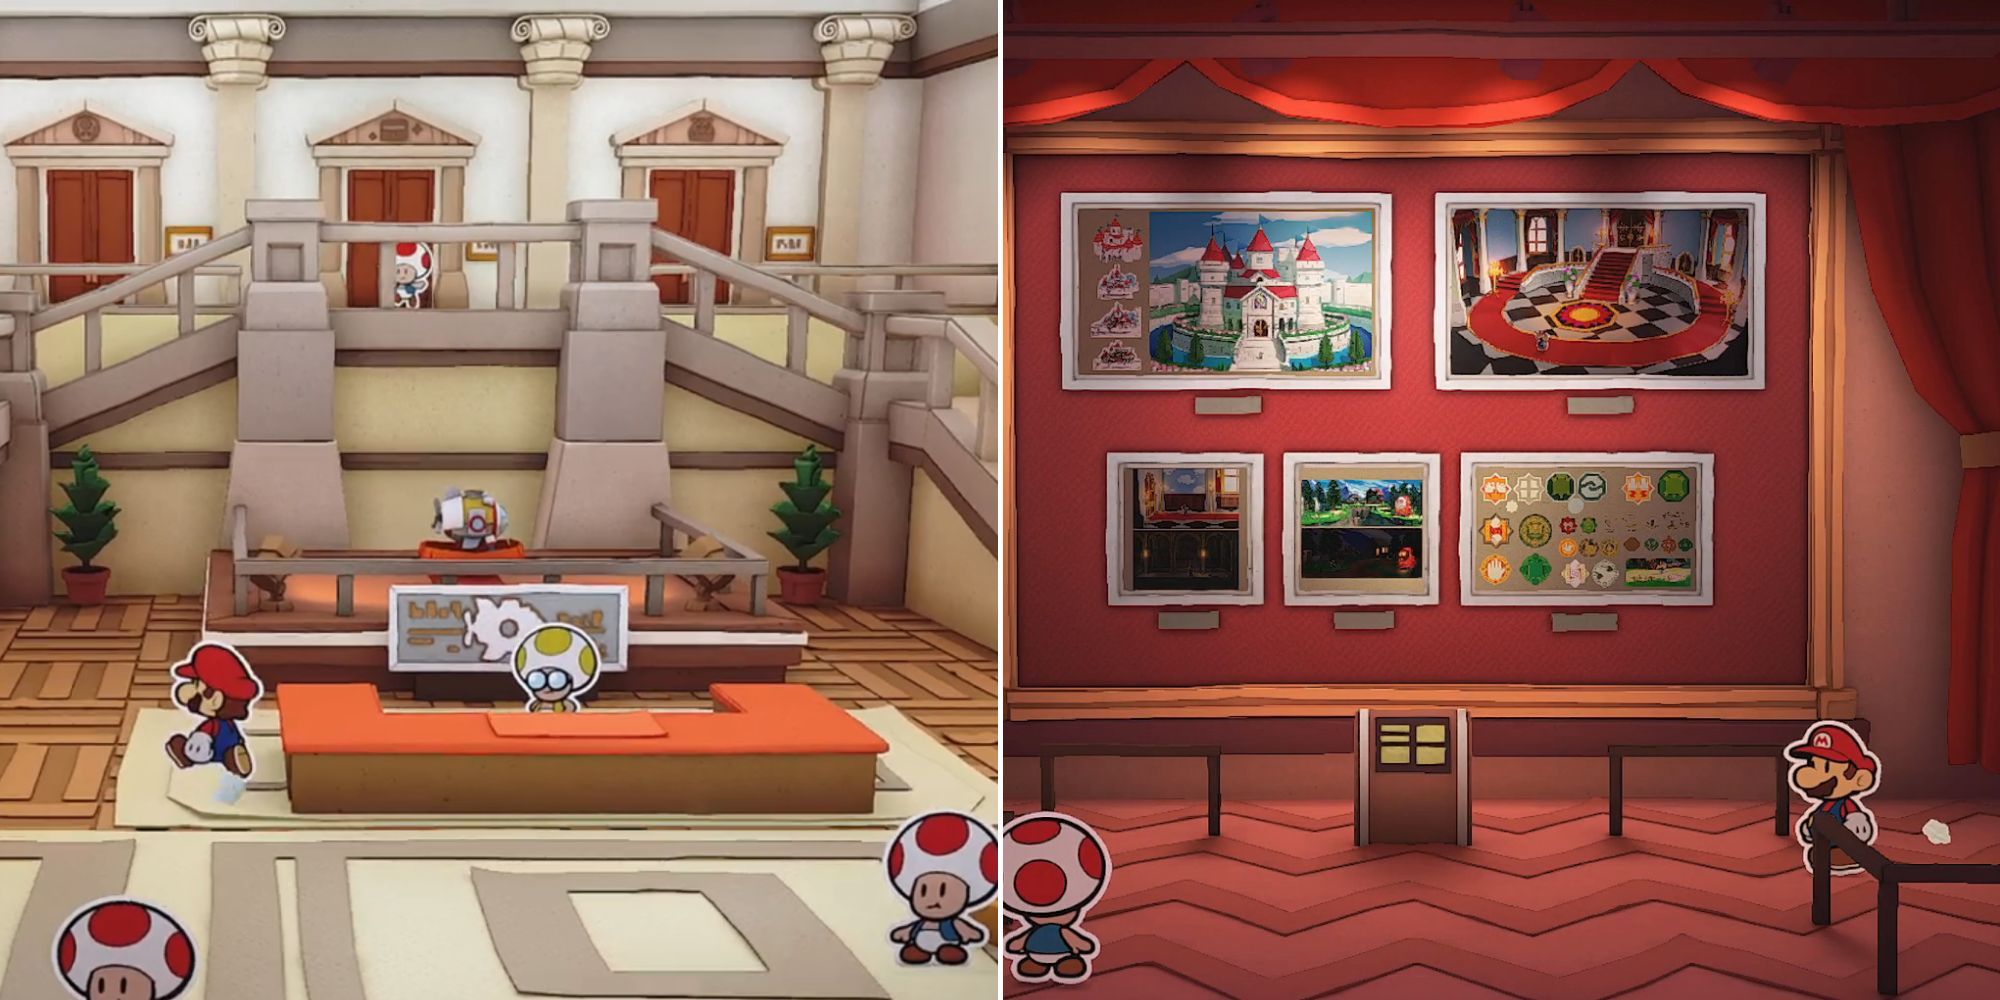 The entrance to the Musée Champignon and the Portrait Room in Paper Mario: The Origami King